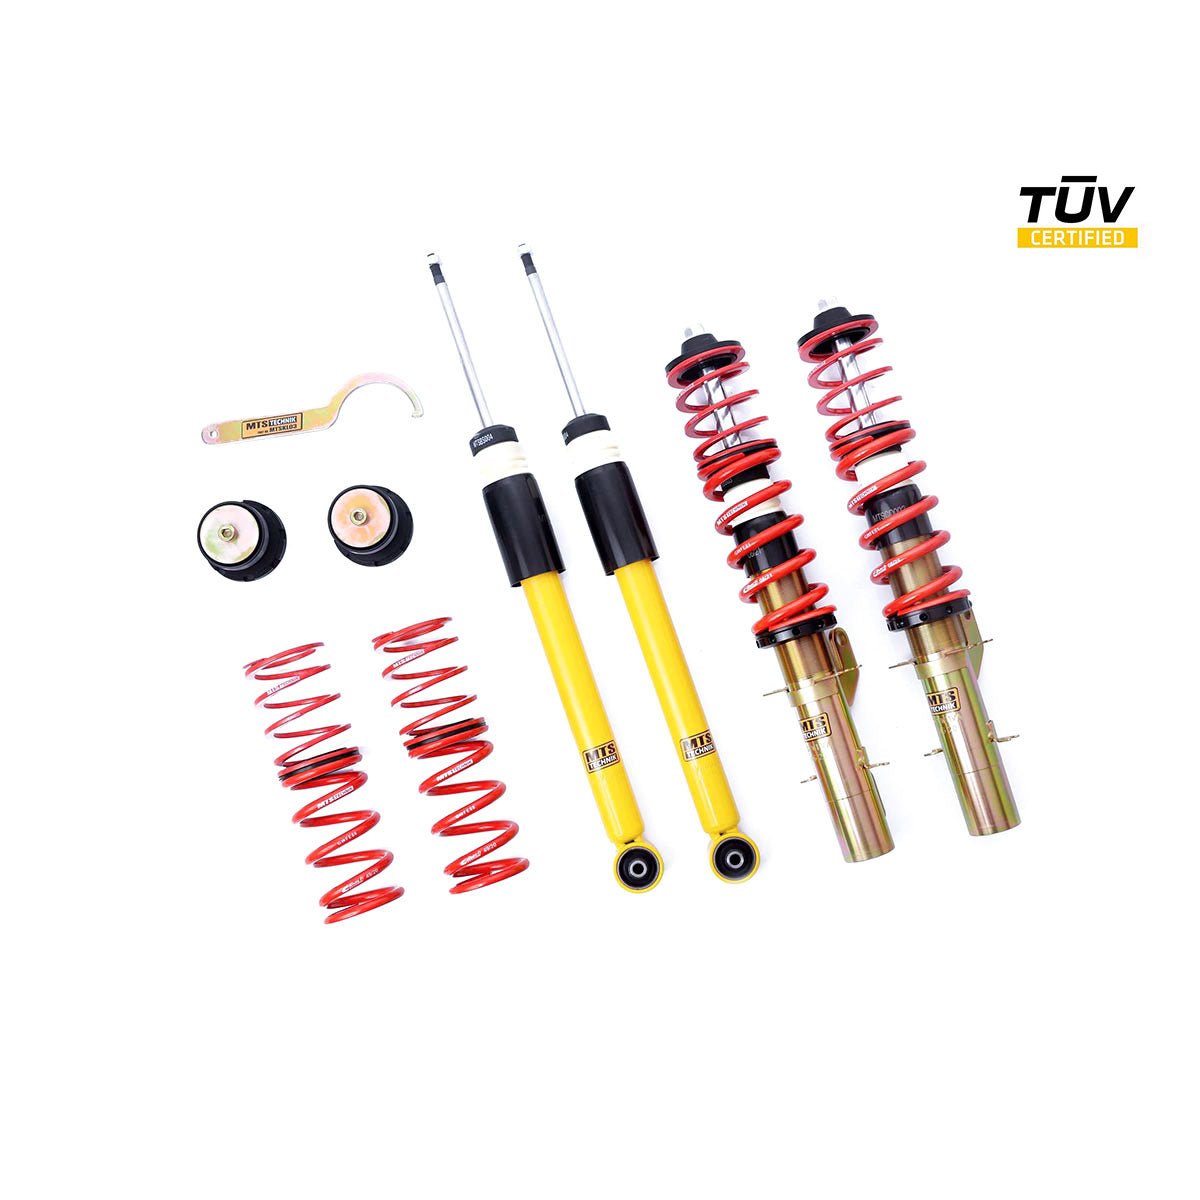 MTS TECHNIK coilover kit SPORT VW Golf 4 (with TÜV) - PARTS33 GmbH